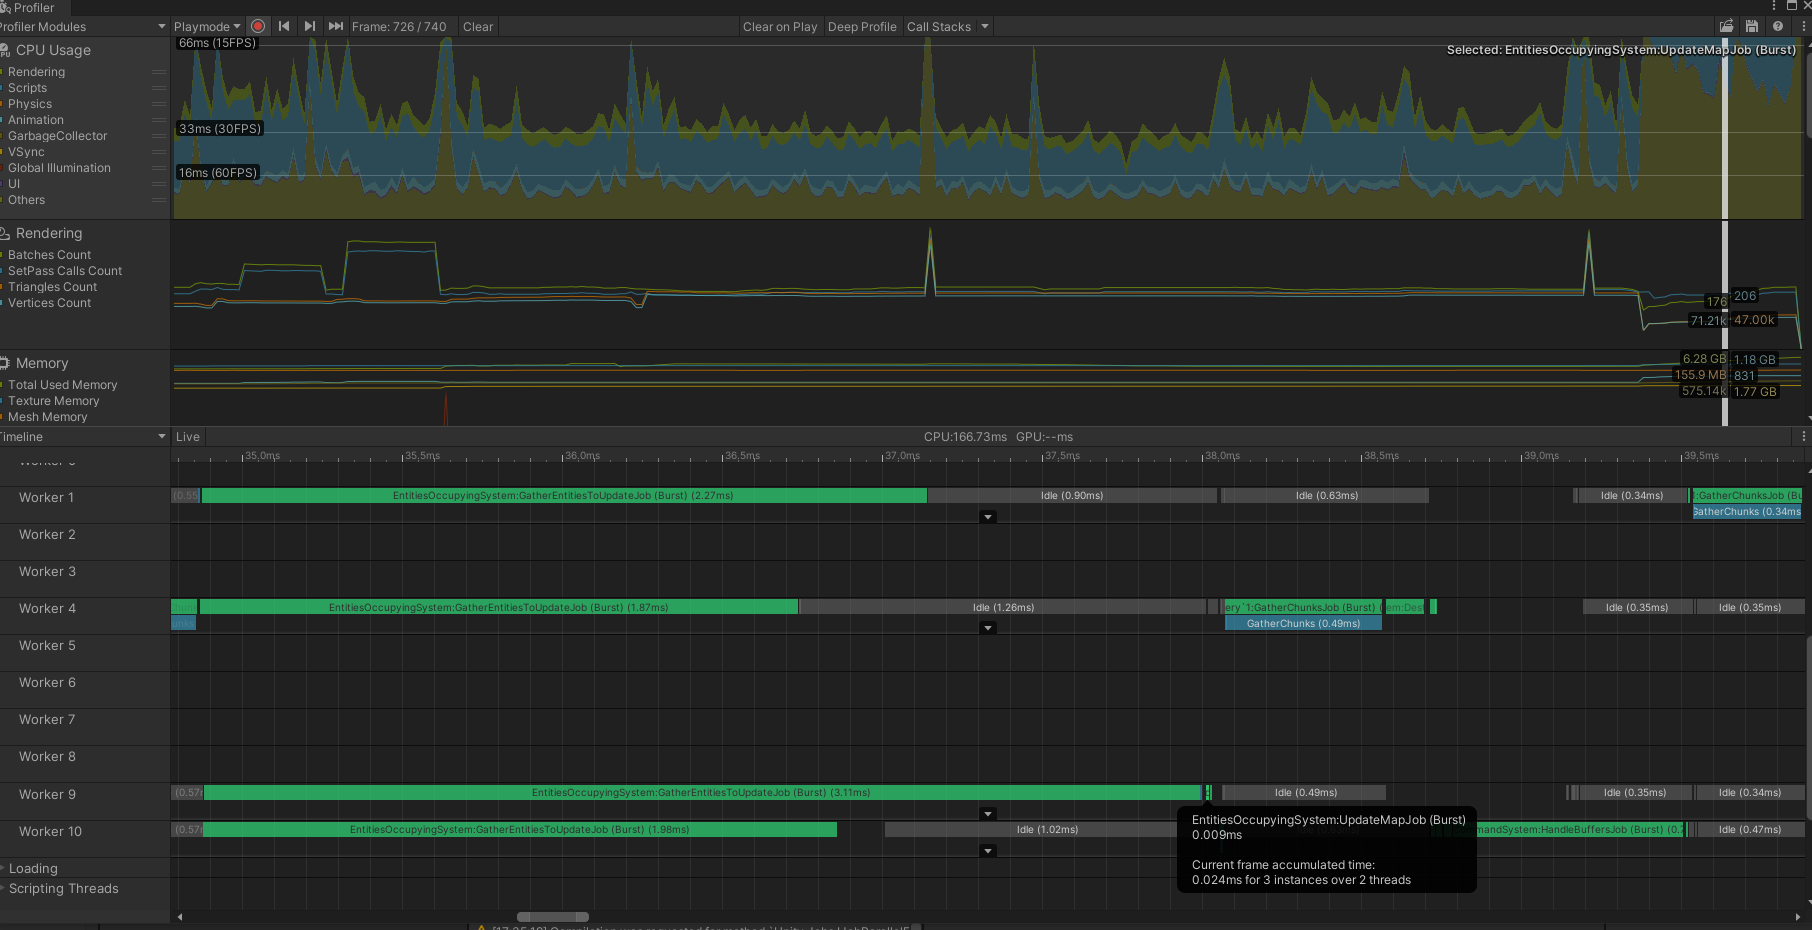 An image of the Unity Profiler window showing a job that is running across multiple threads.